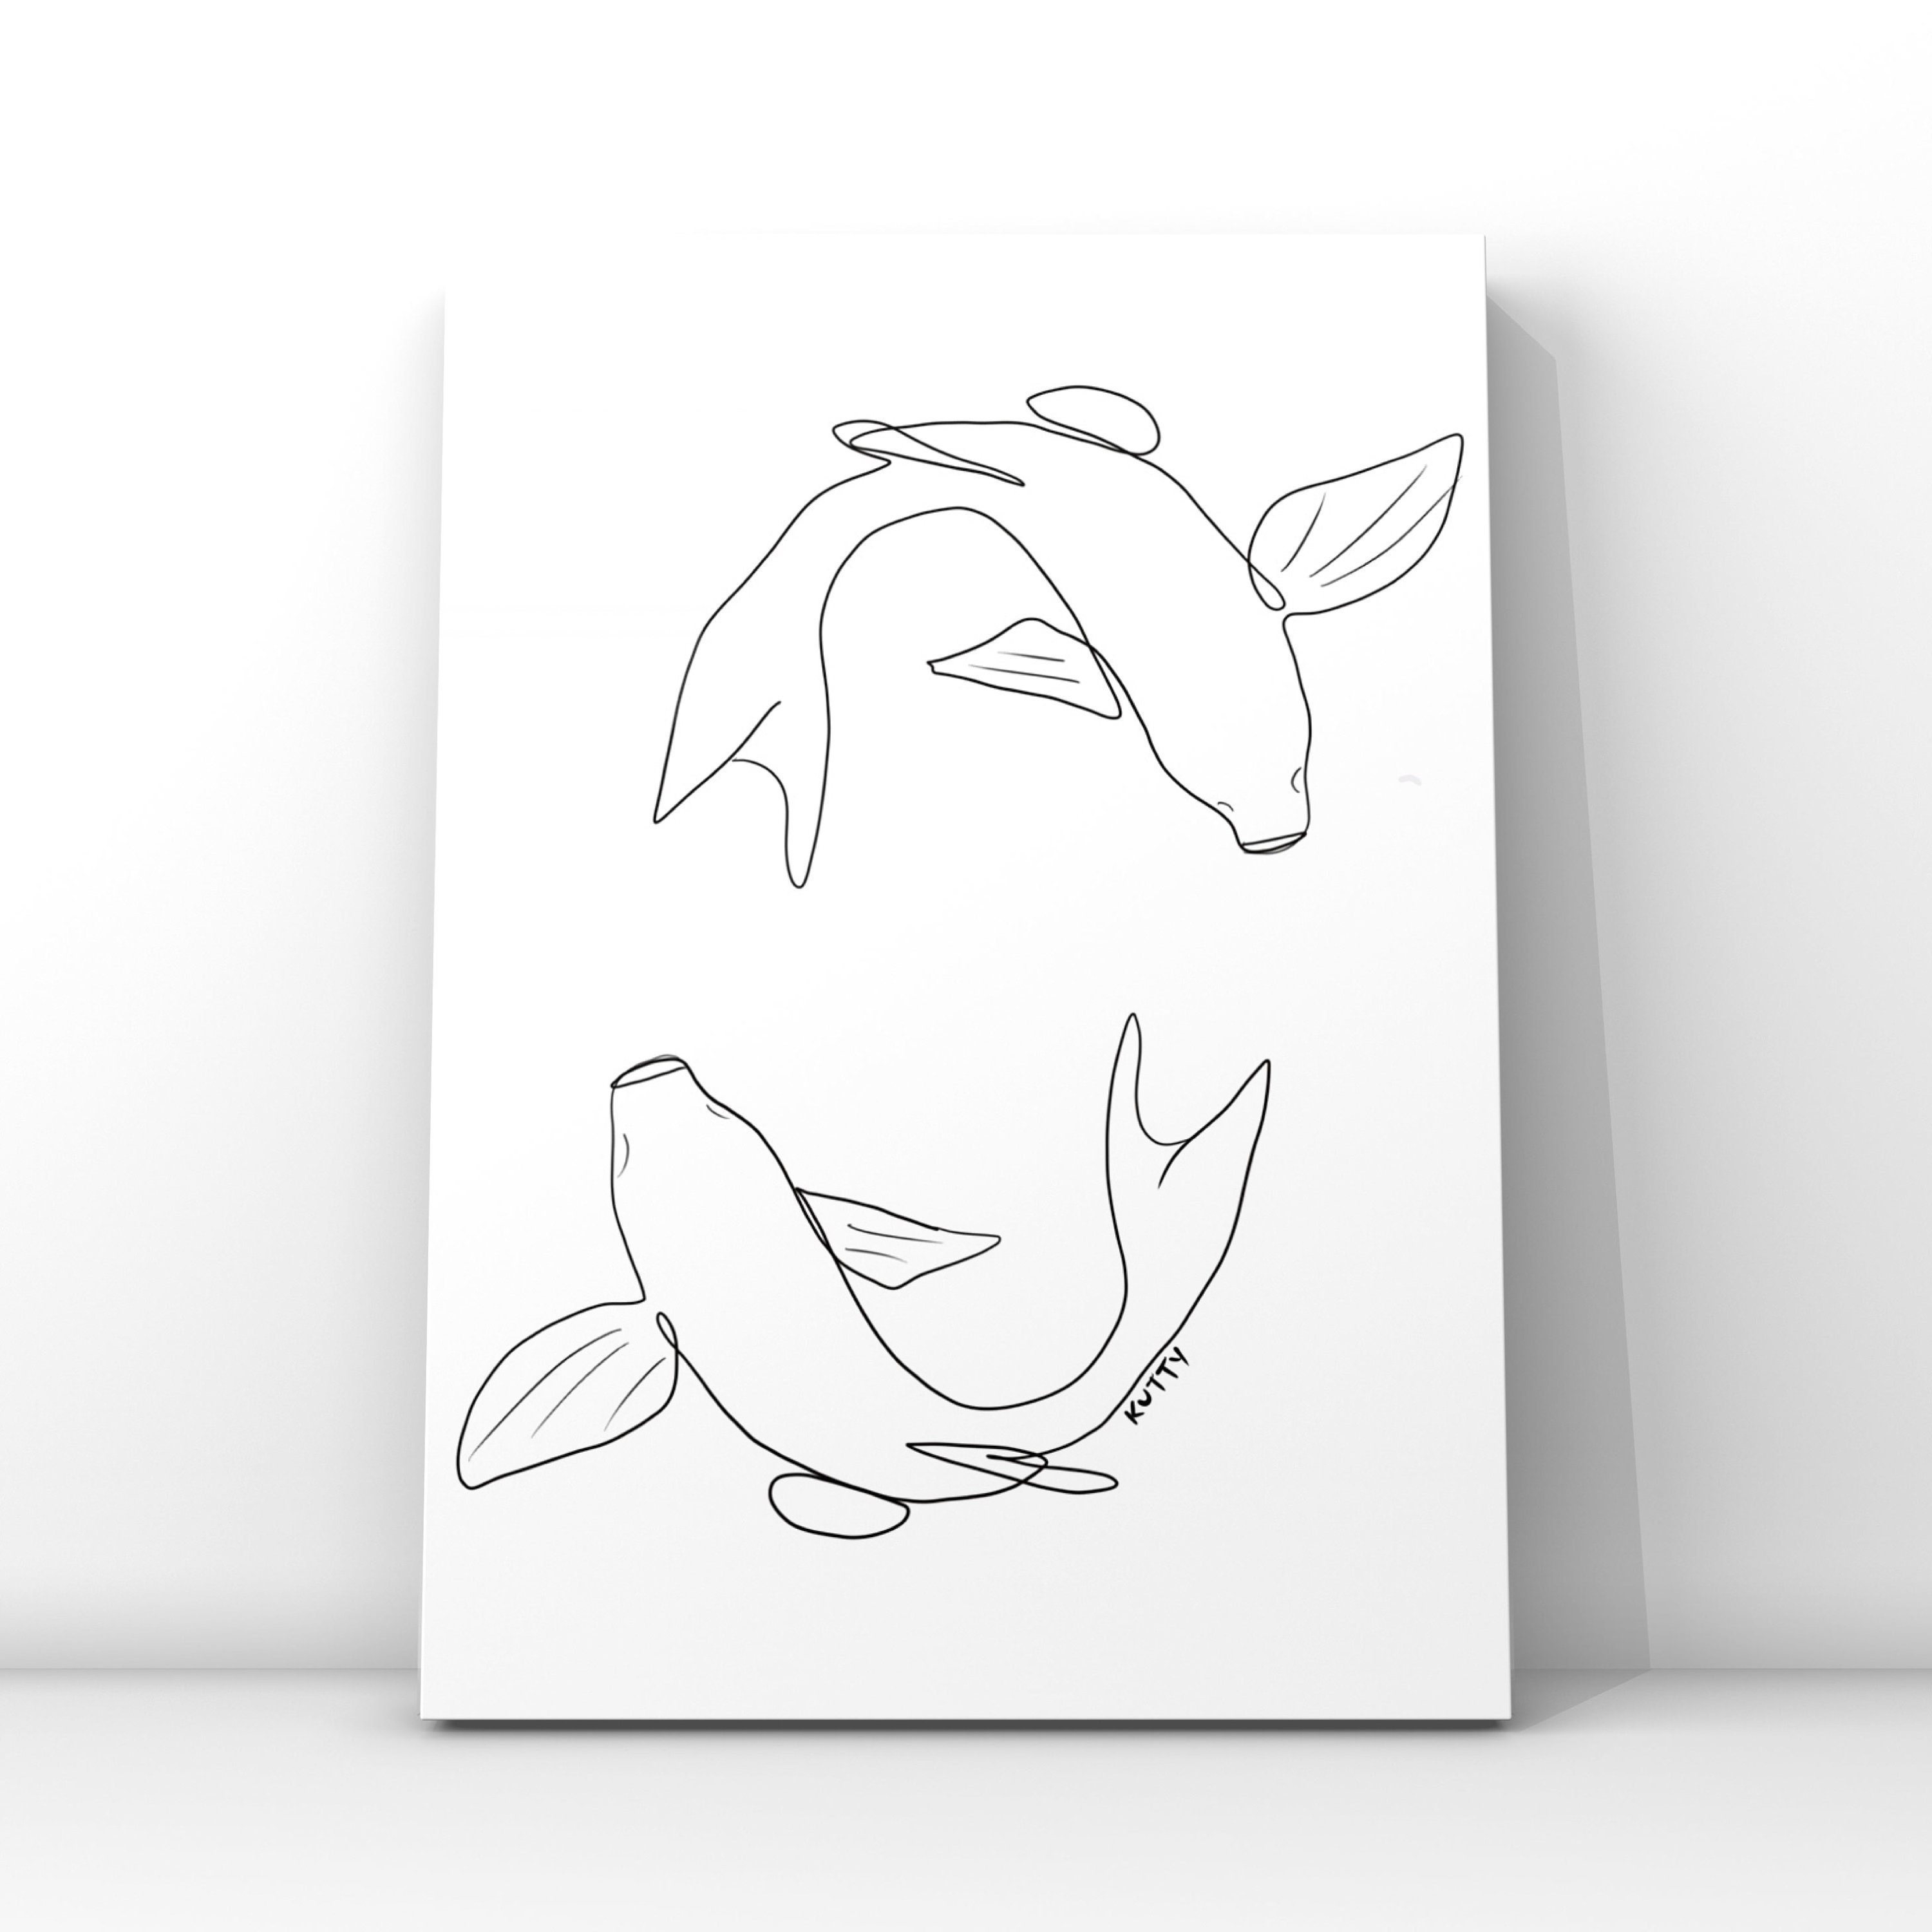 KOI FISH CONTINUOUS Line Fine Line Art Abstract Koi Fish Japanese